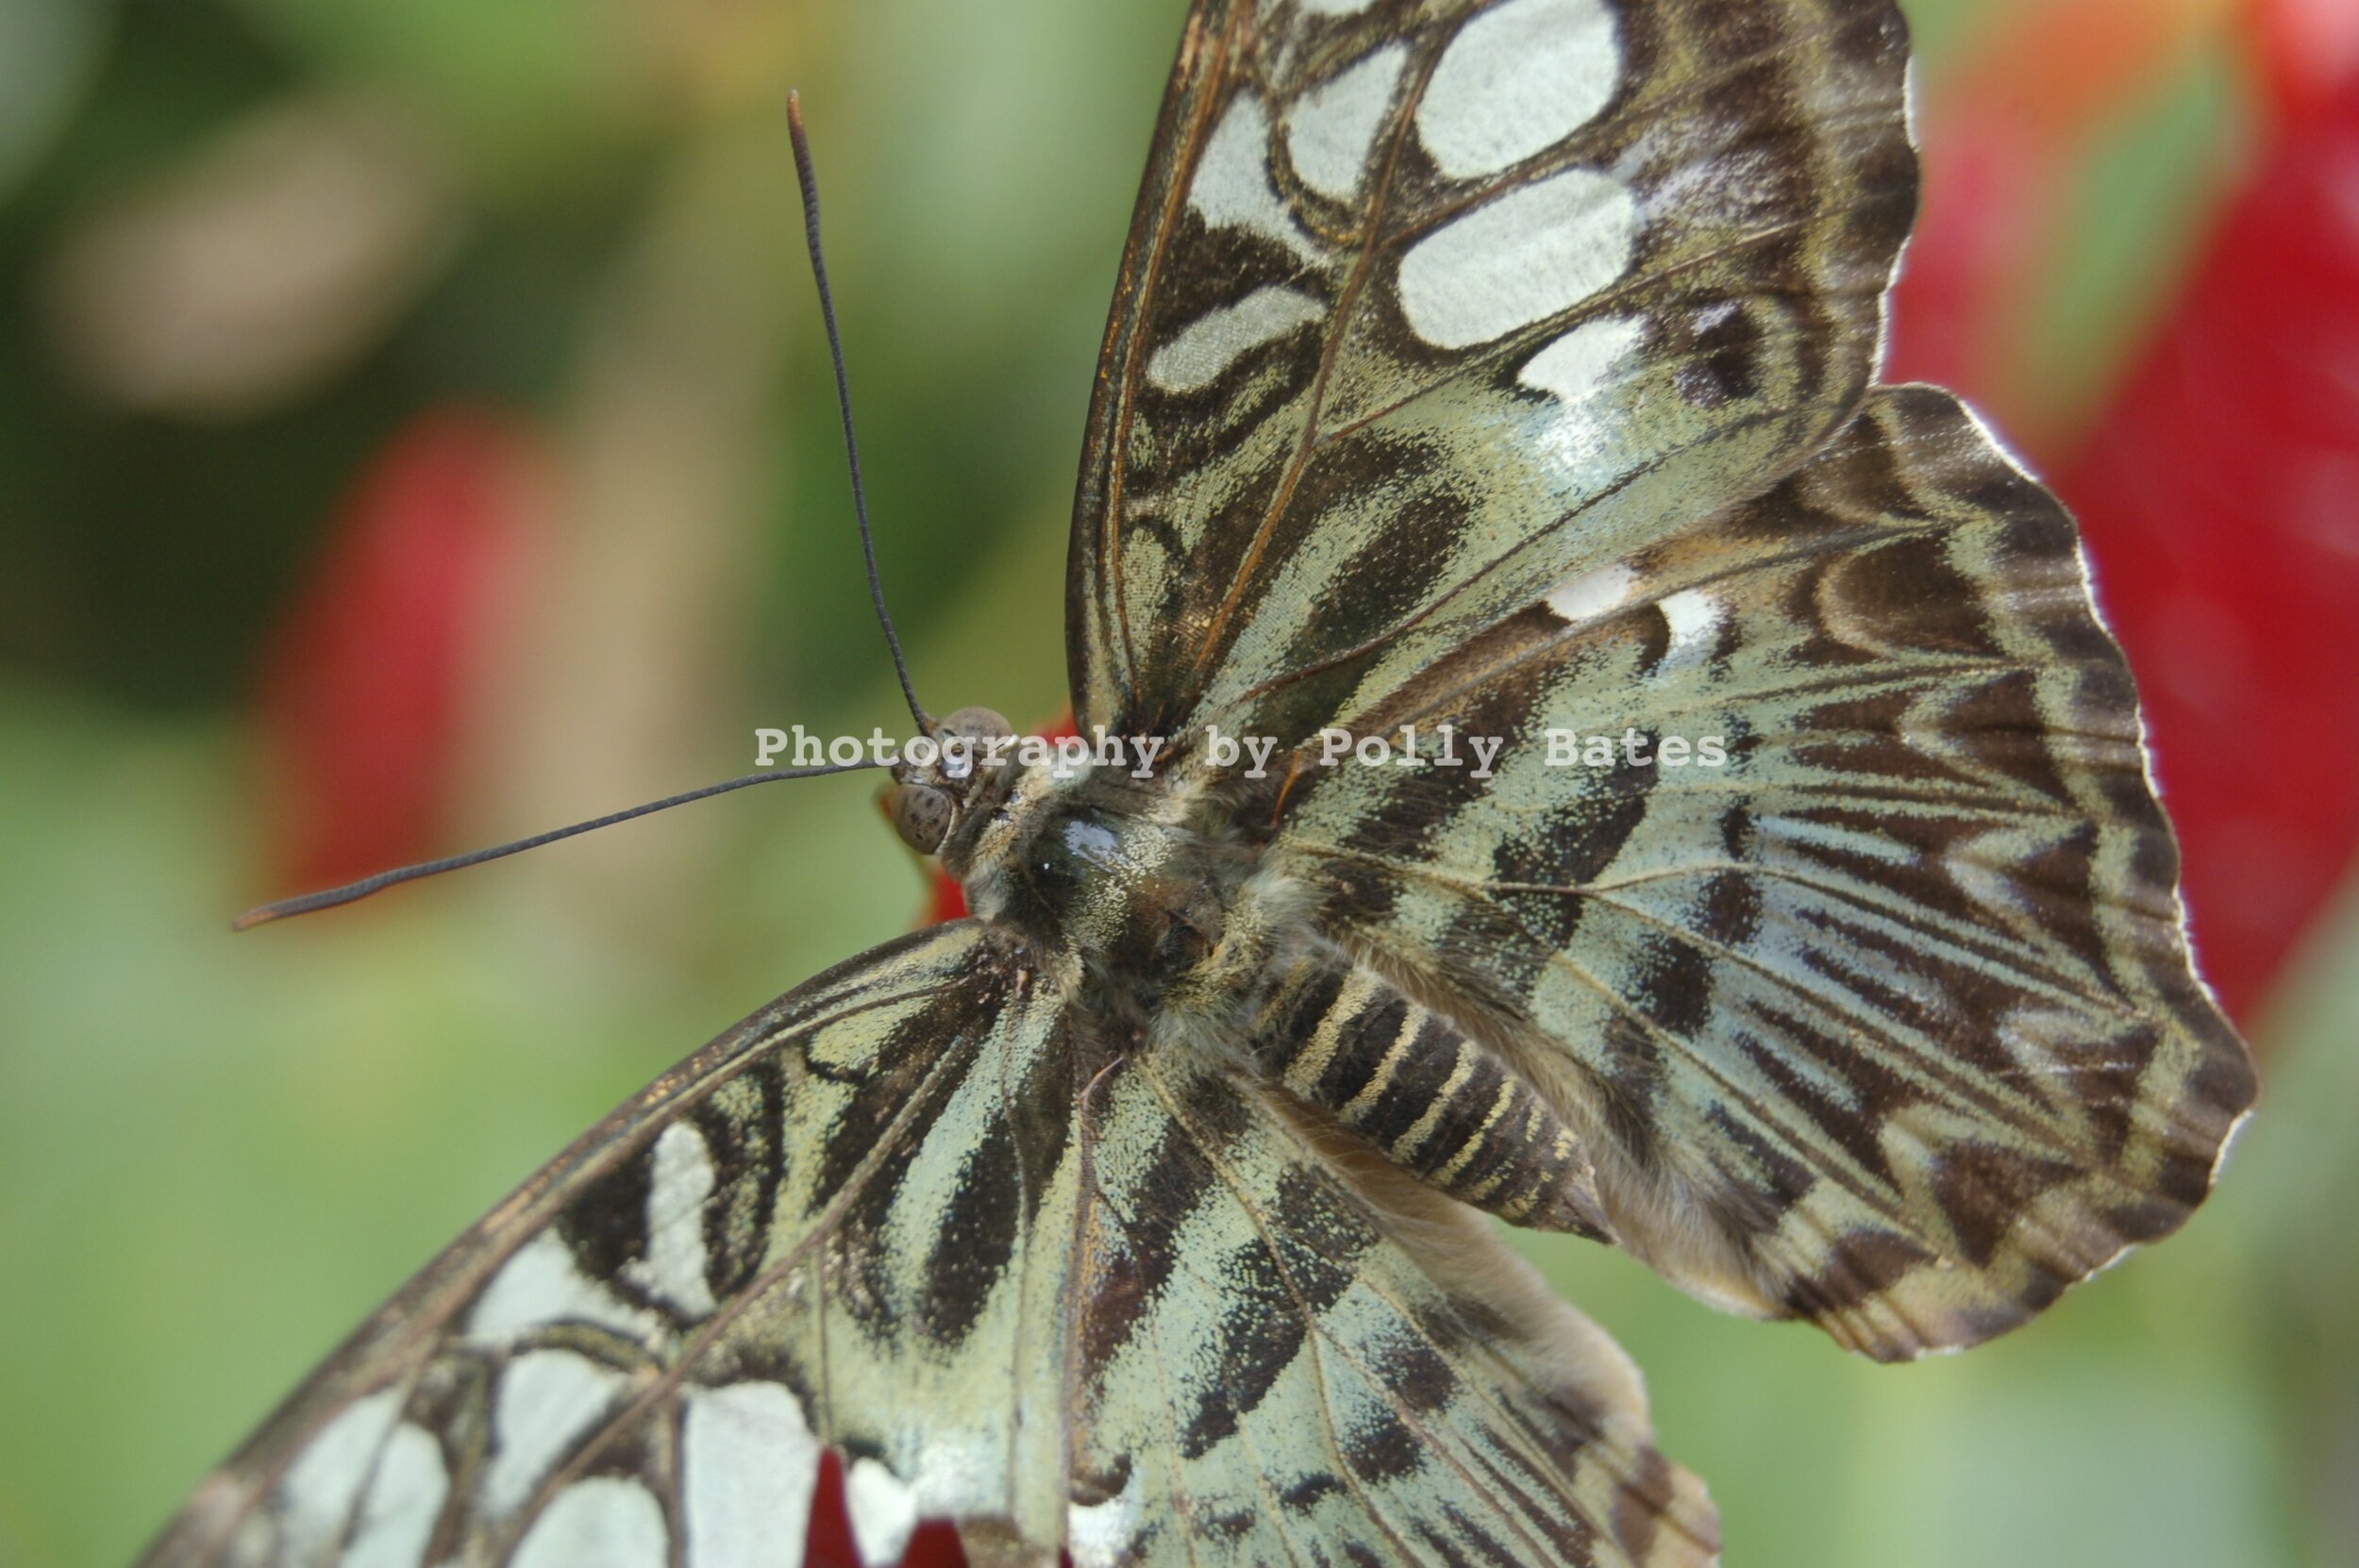 Polly Bates Butterfly Photography 1.jpg